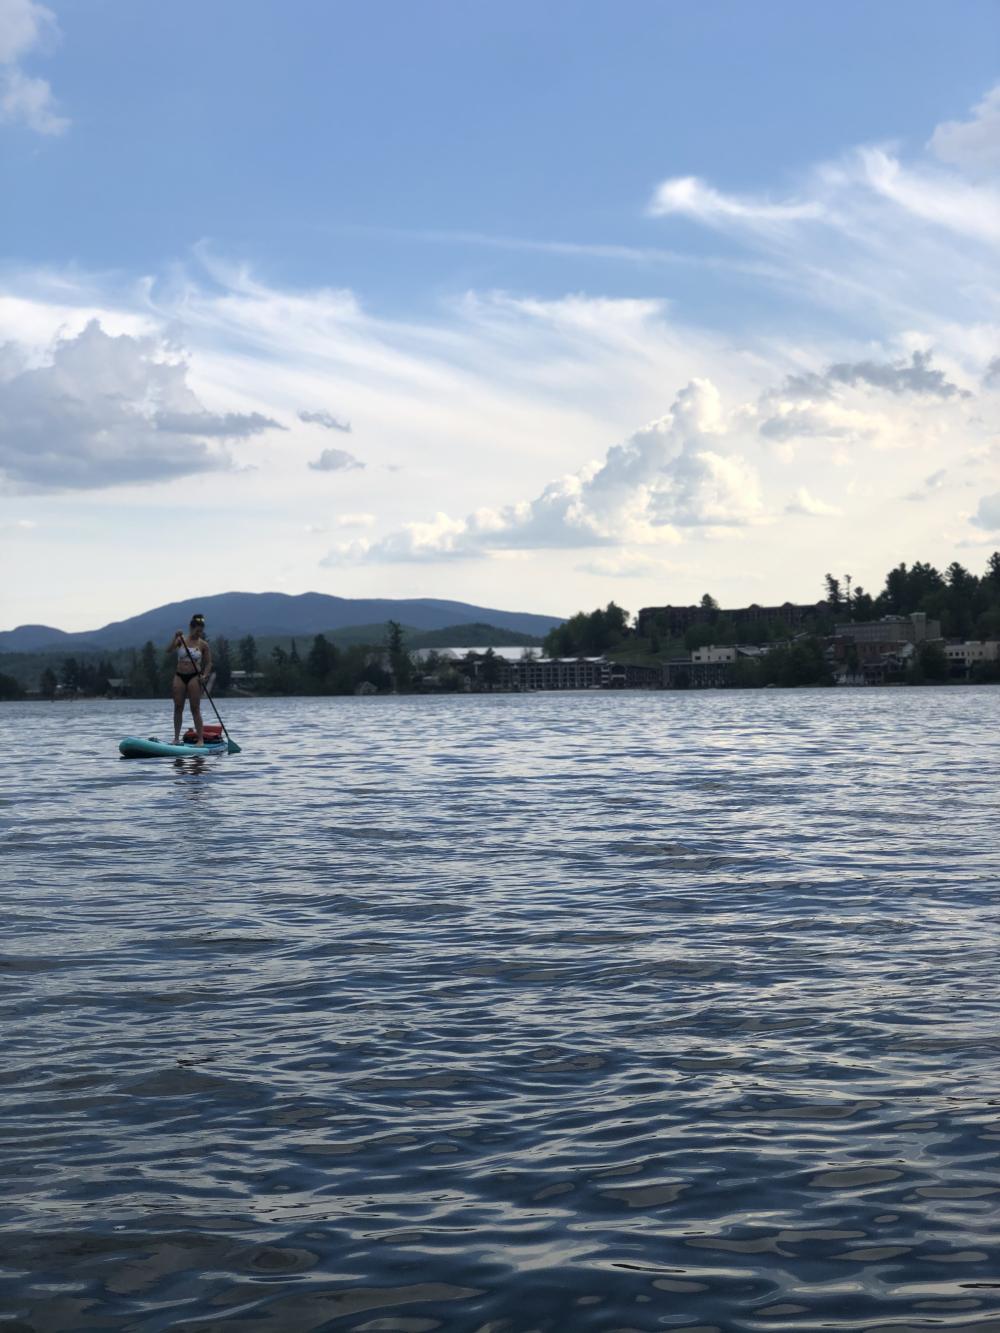 A woman paddles a SUP on a lake with mountains and trees in the background.